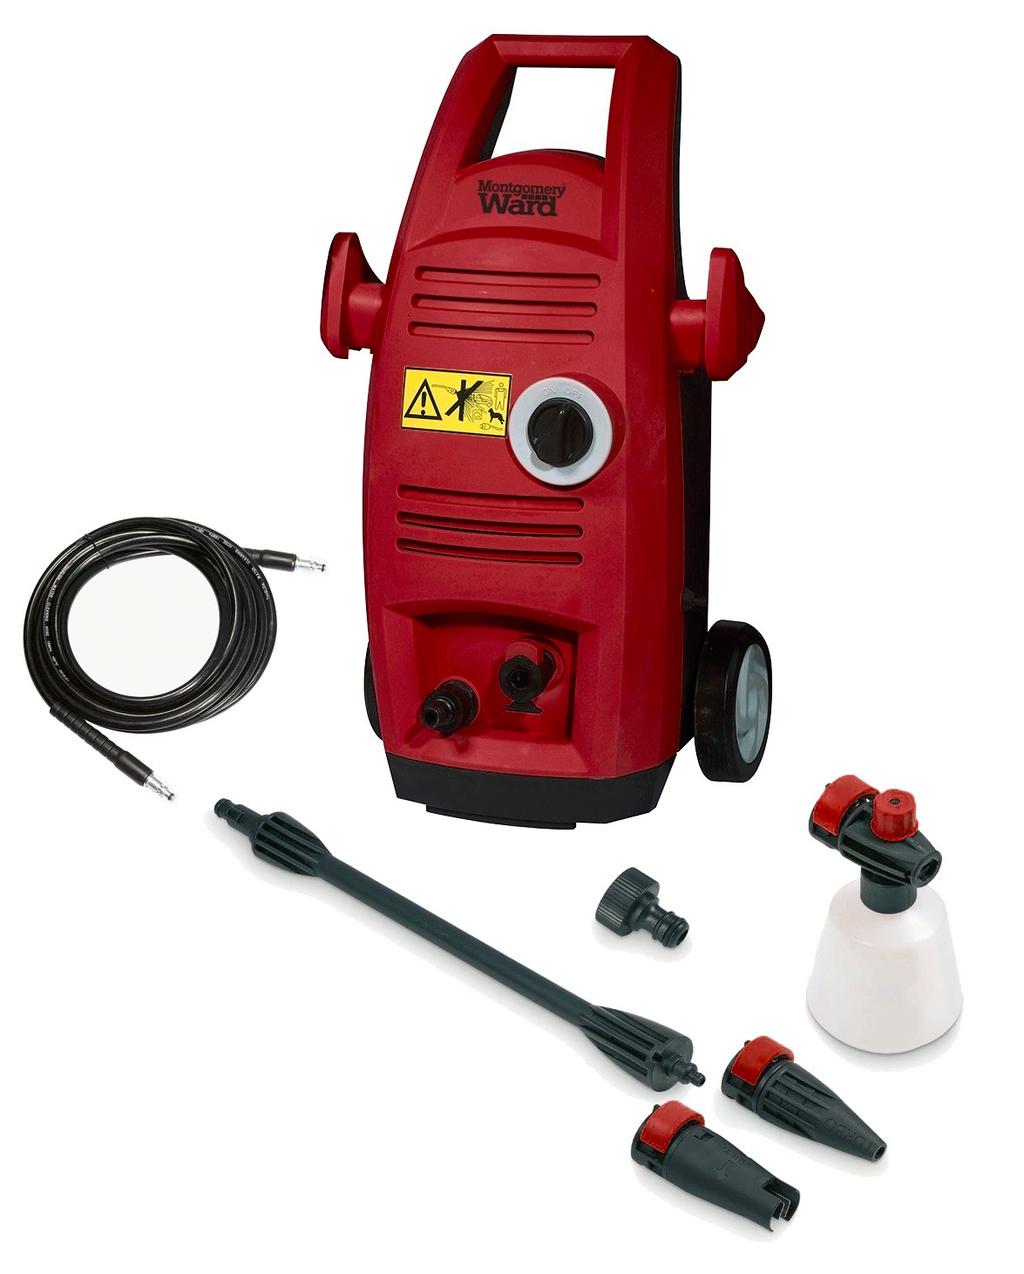 Electrical Safety Parts & Features This power tool is equipped with a polarized plug in which one prong is wider than the other. This is a safety feature to reduce the risk of electrical shock.